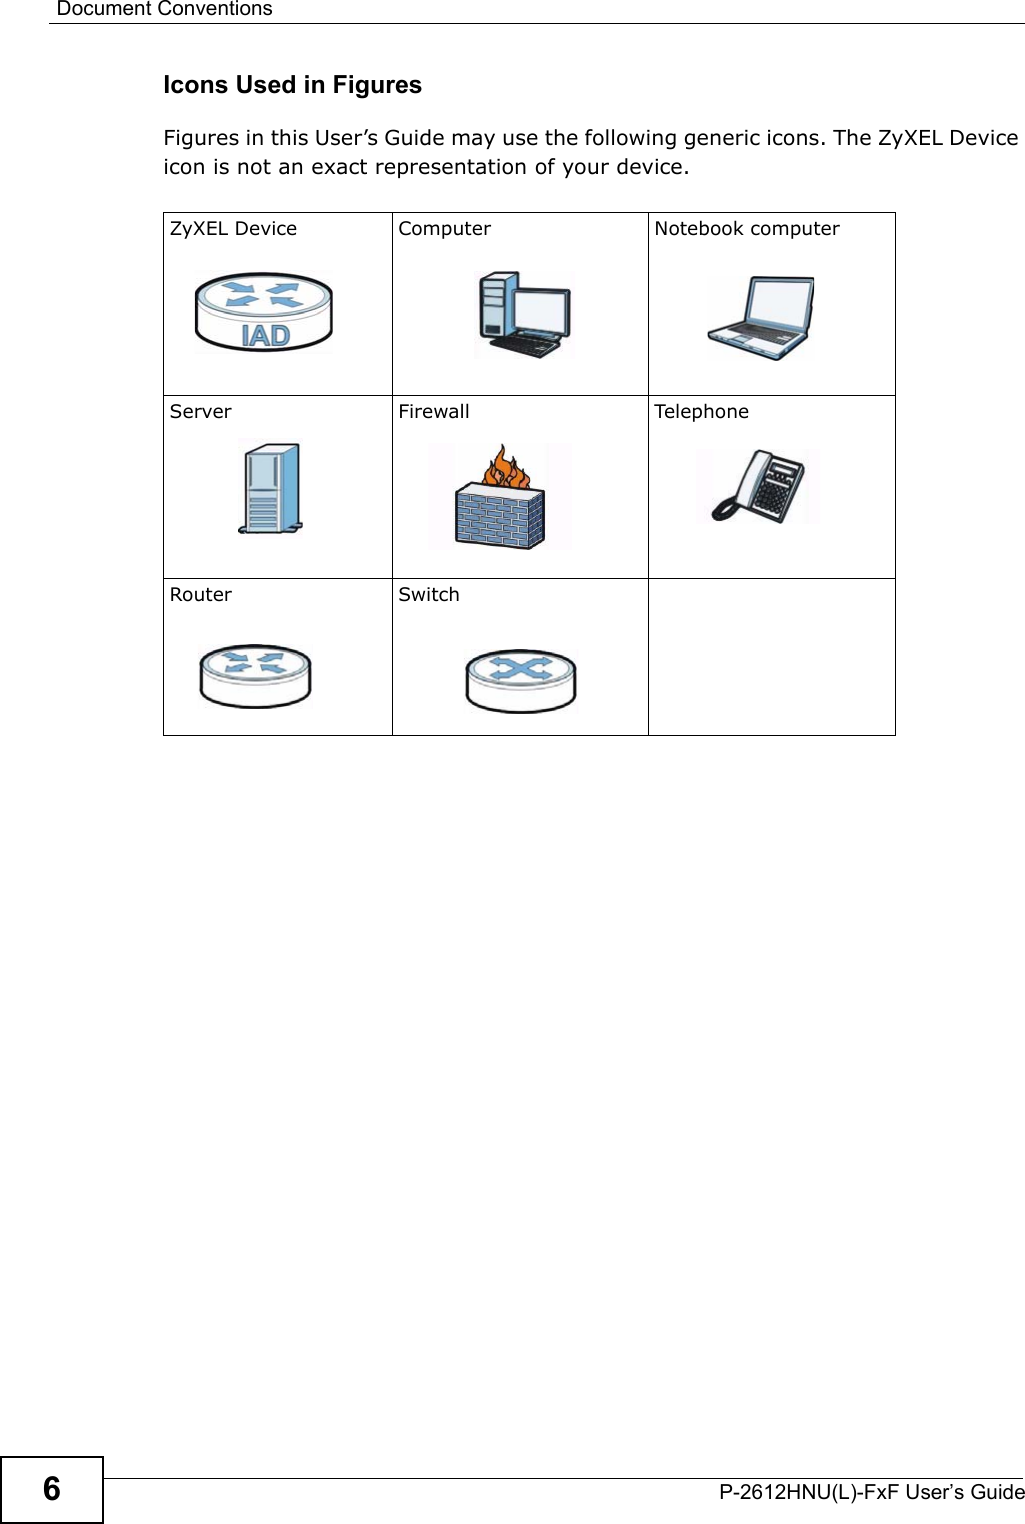 Document ConventionsP-2612HNU(L)-FxF User’s Guide6Icons Used in FiguresFigures in this User’s Guide may use the following generic icons. The ZyXEL Device icon is not an exact representation of your device.ZyXEL Device Computer Notebook computerServer Firewall TelephoneRouter Switch